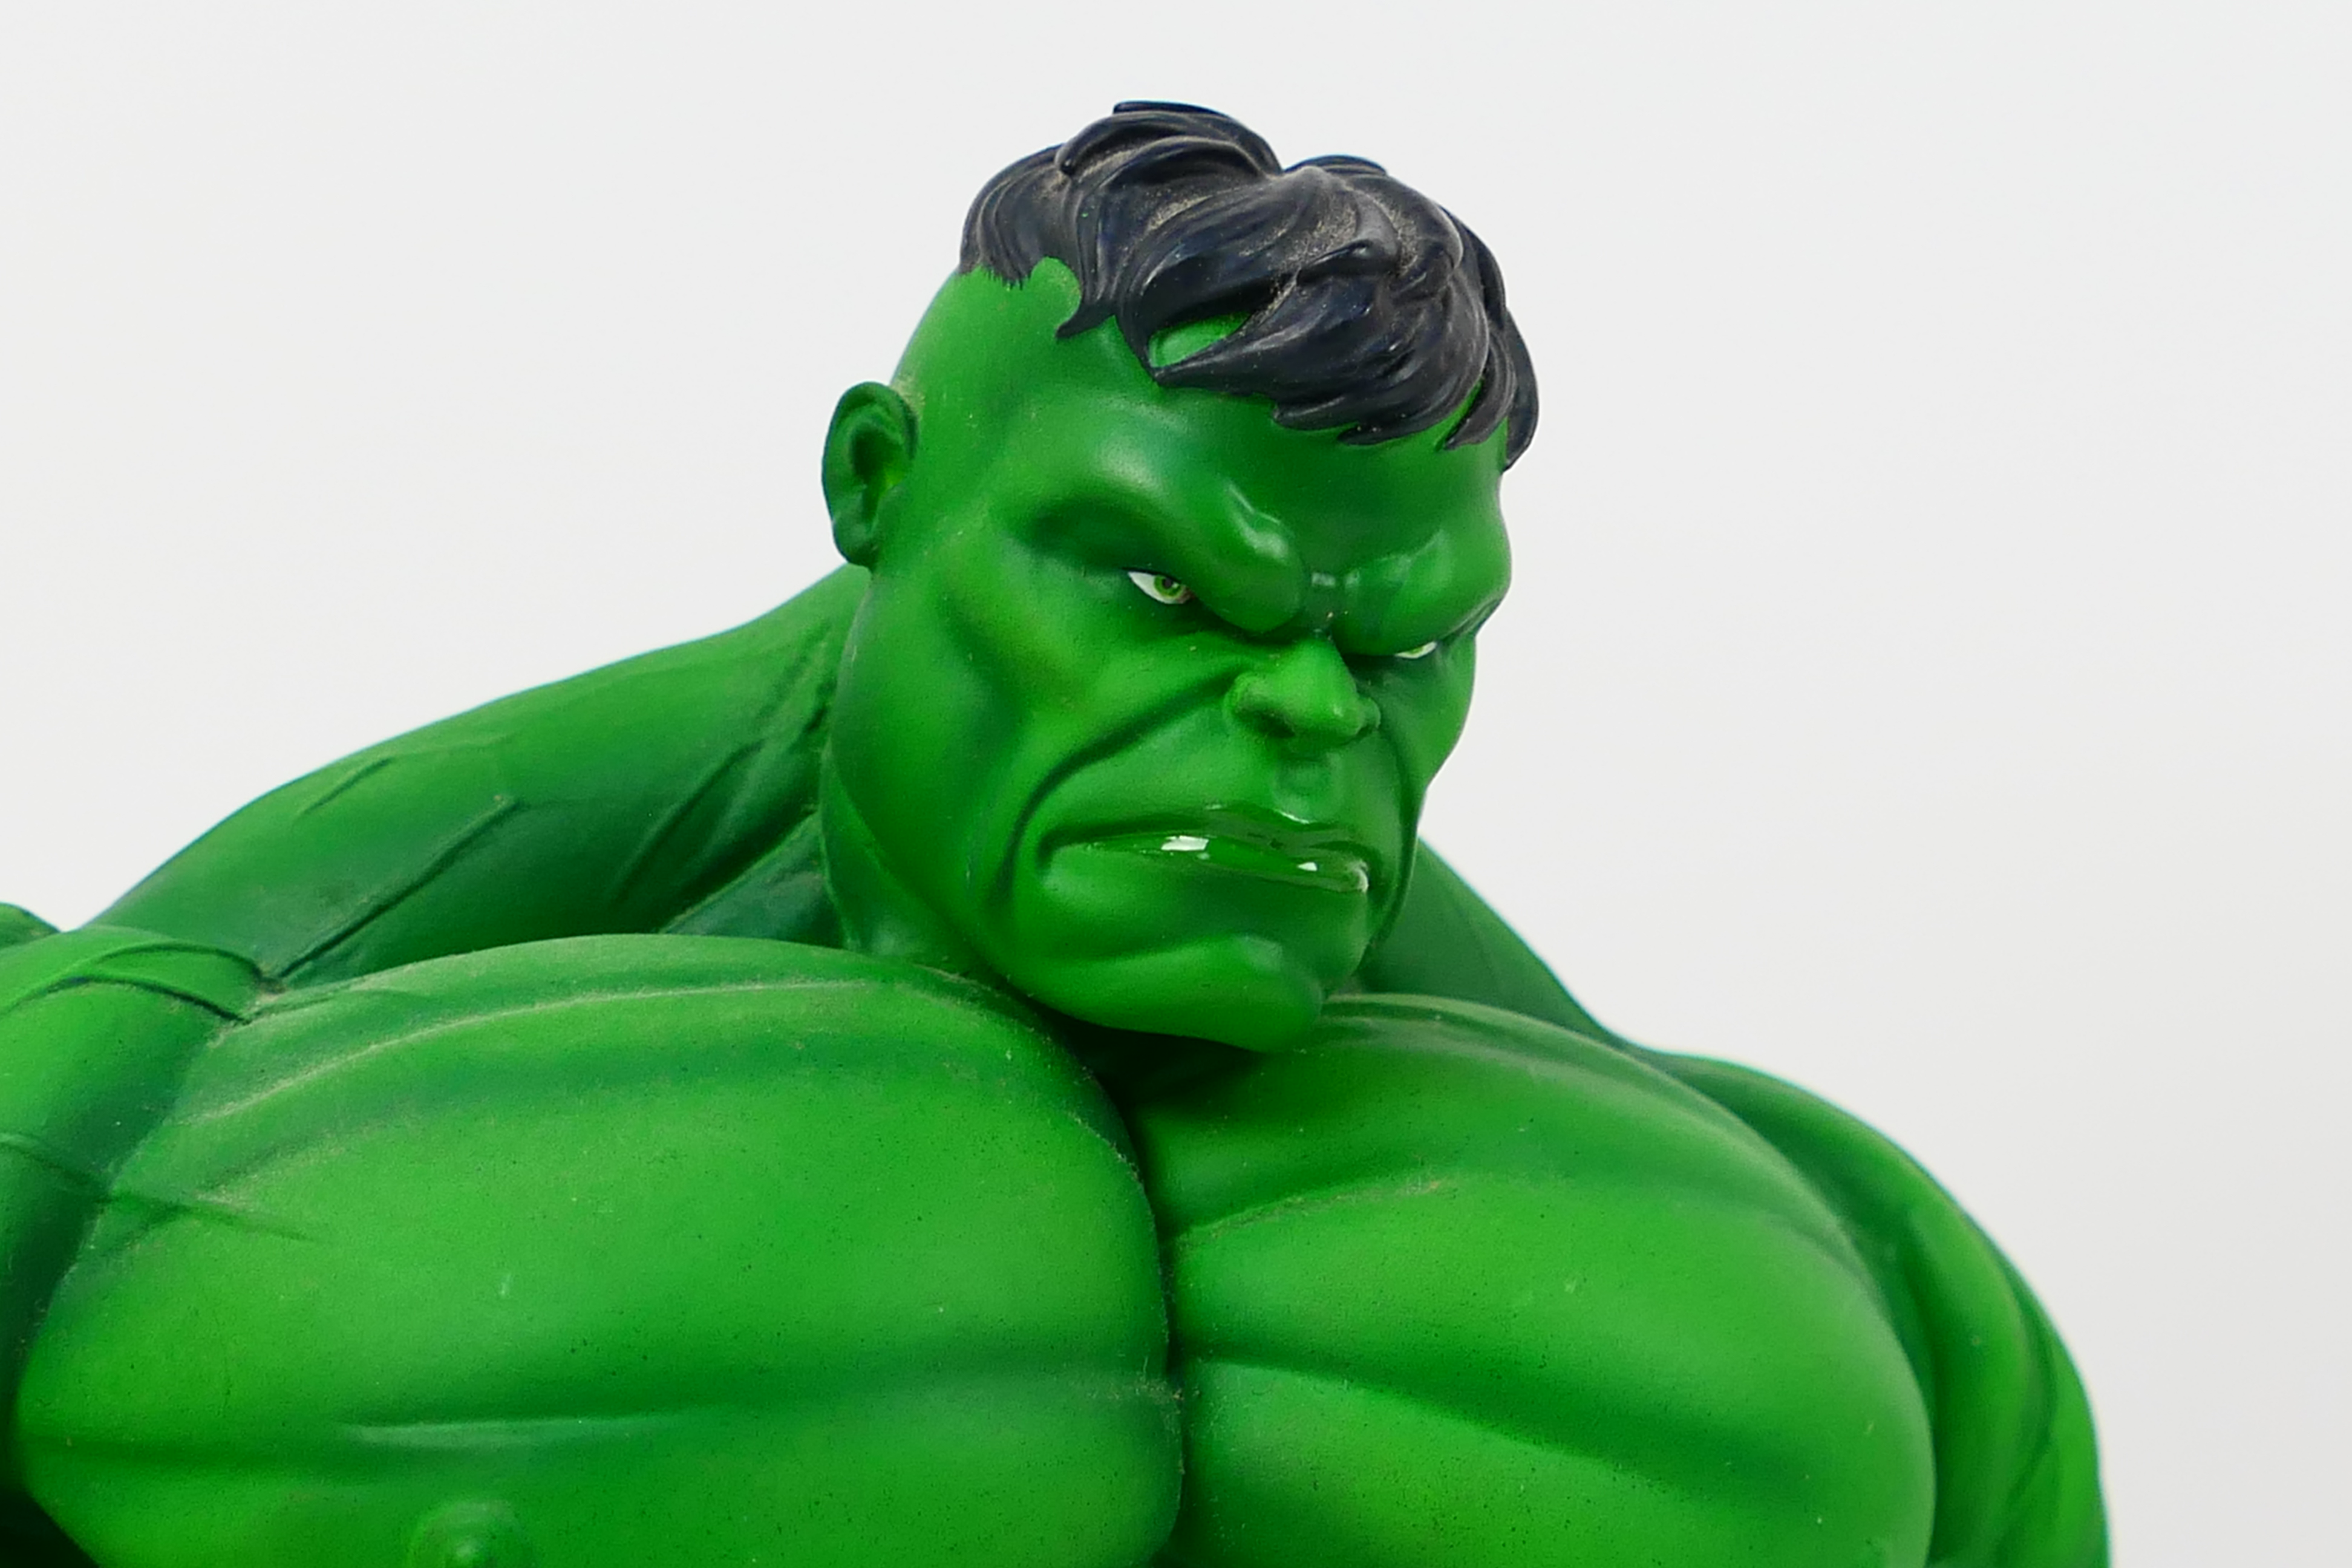 Gentle Giant Ltd - Marvel - A limited edition The Incredible Hulk 7.5 inch mini bust. - Image 3 of 6